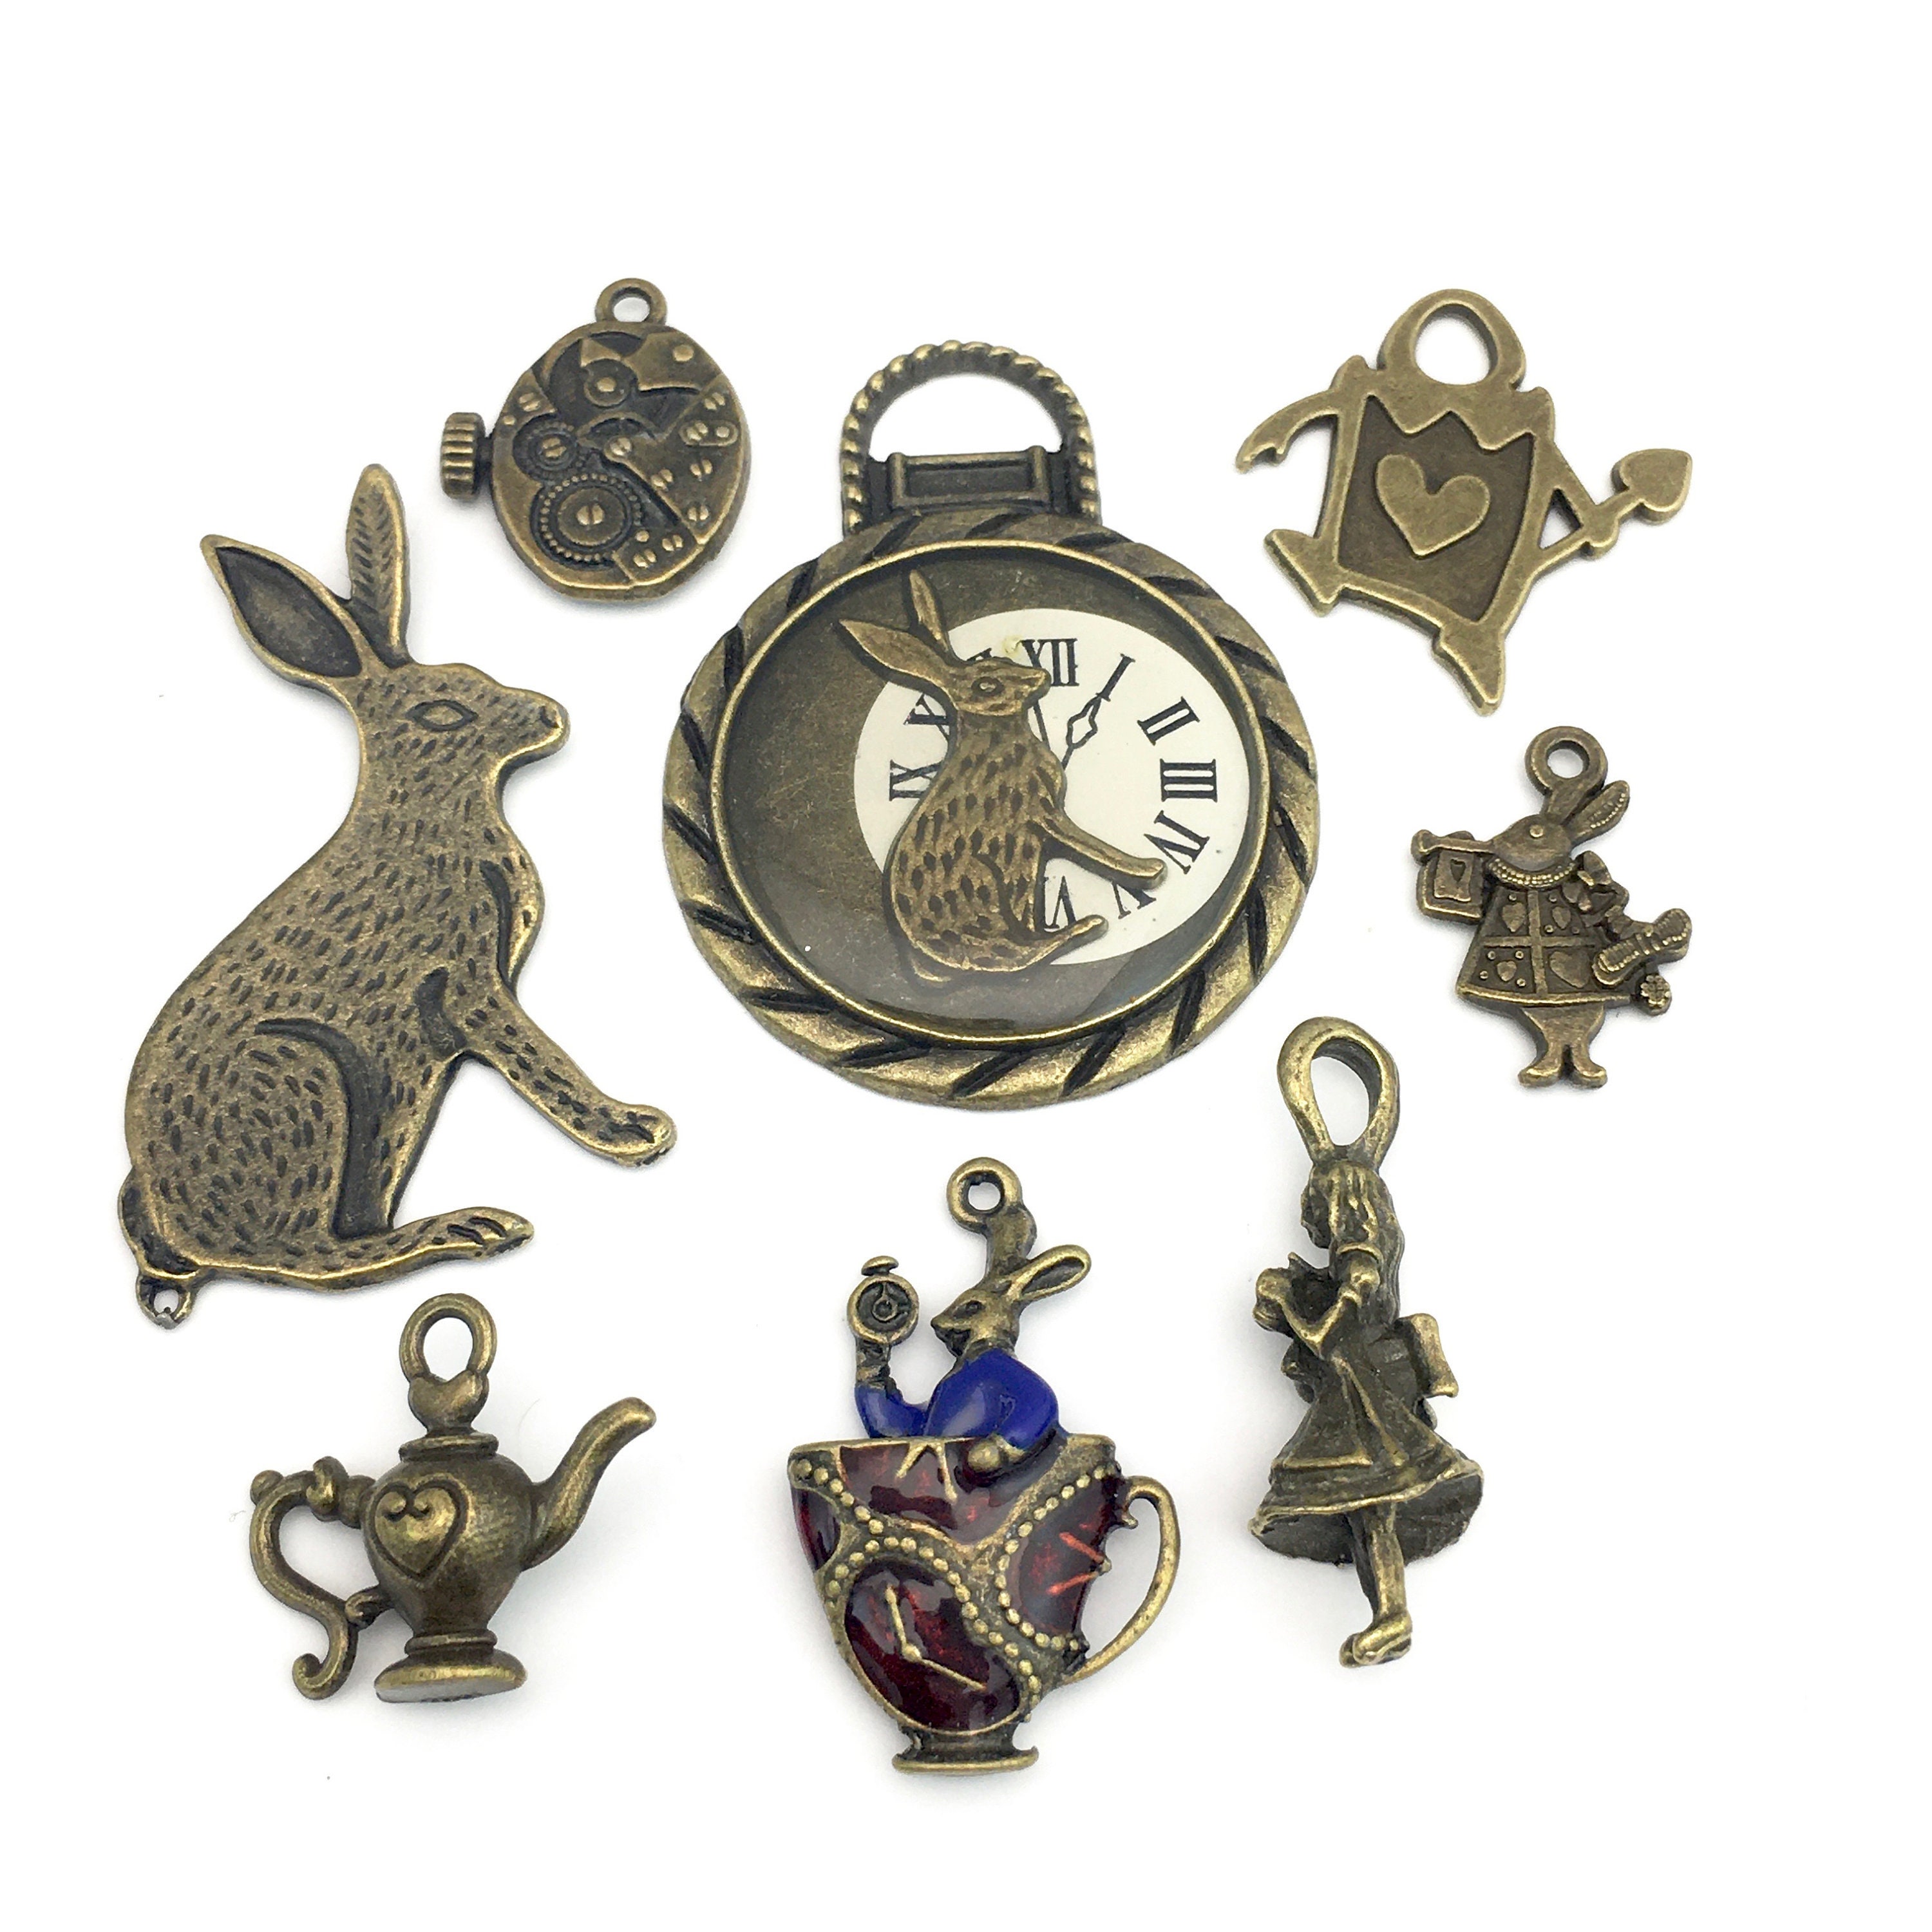 8 Alice in Wonderland Charms Collection Bronze Tone,20mm to 45mm ENS B 276  